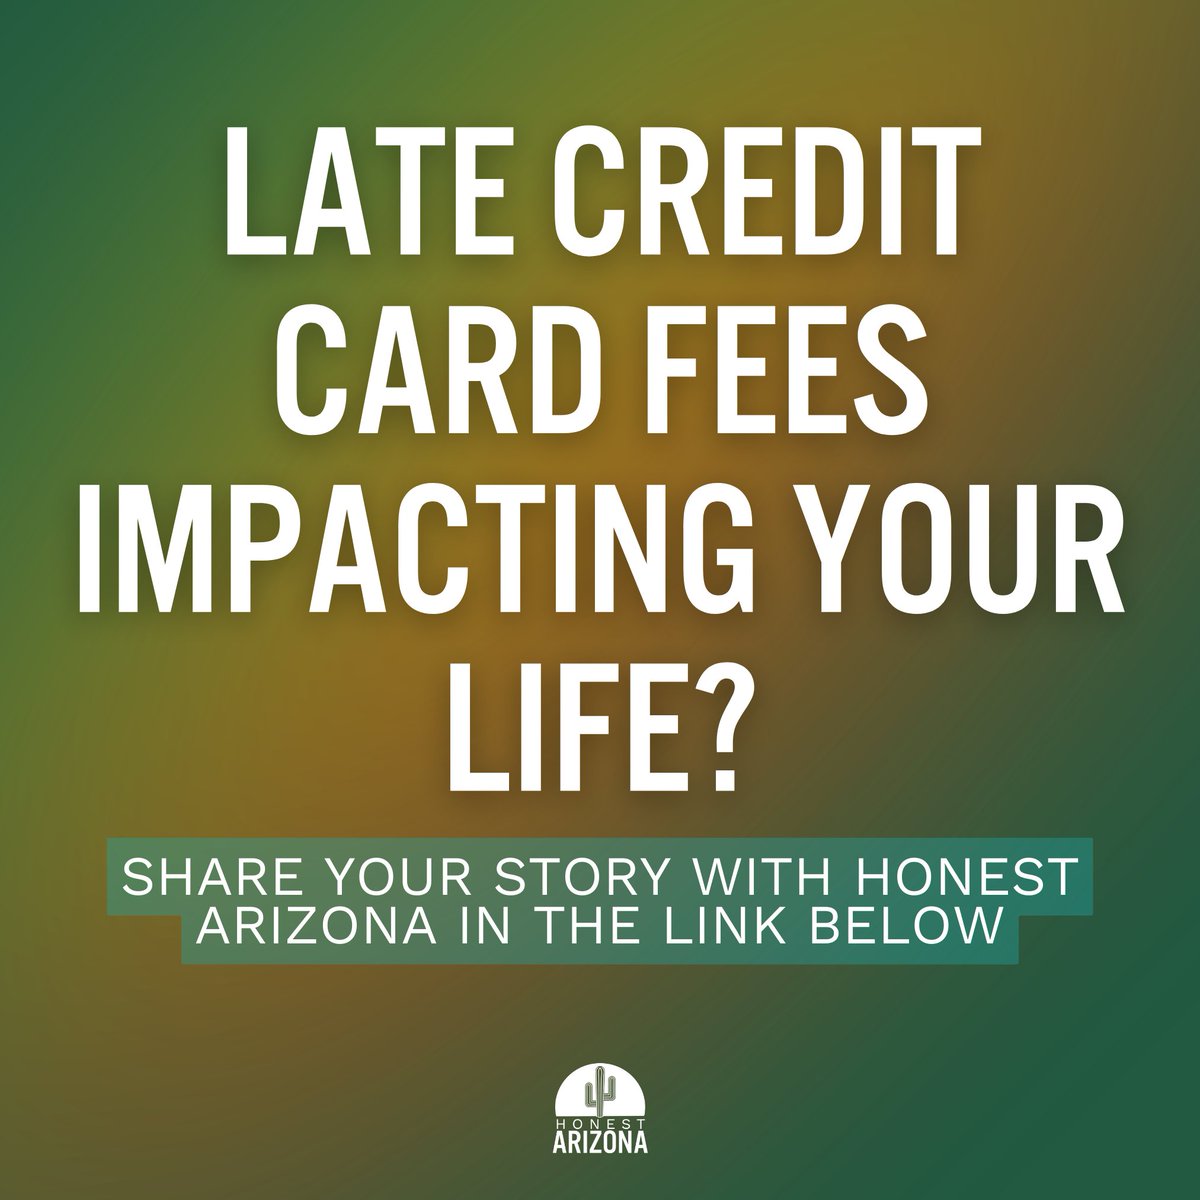 Credit card late fees can be excessive and unnecessary, impacting working Arizonans. Have these fees impacted you? Share your story with us! forms.gle/oMaUC47RvZ16aj…